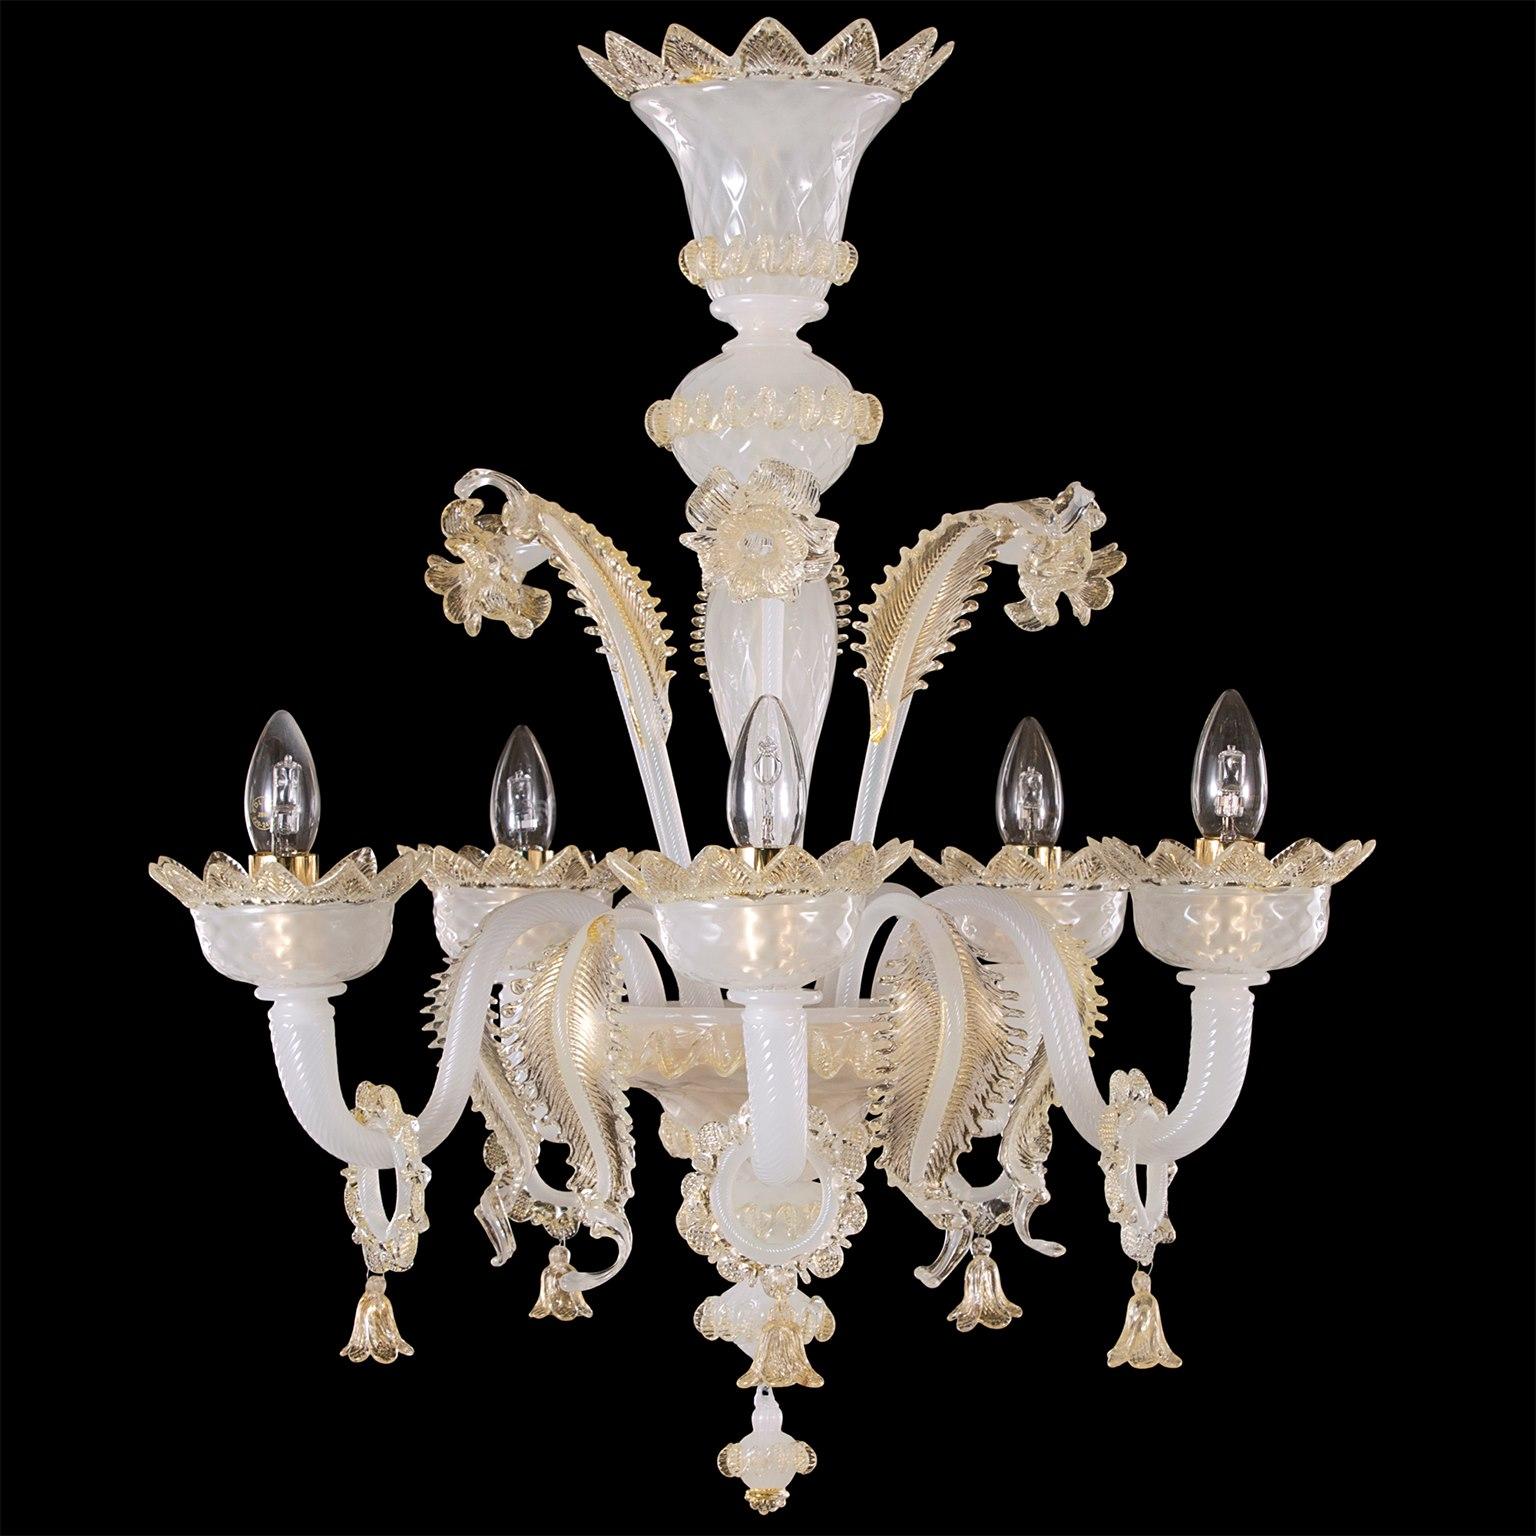 Classic Chandelier 5 Arms white silk Murano Glass details gold by Multiforme.
The classic Murano glass chandelier, as it is in the collective imagination. As many other chandeliers in our collections, V-Classic 800 is designed with attention to